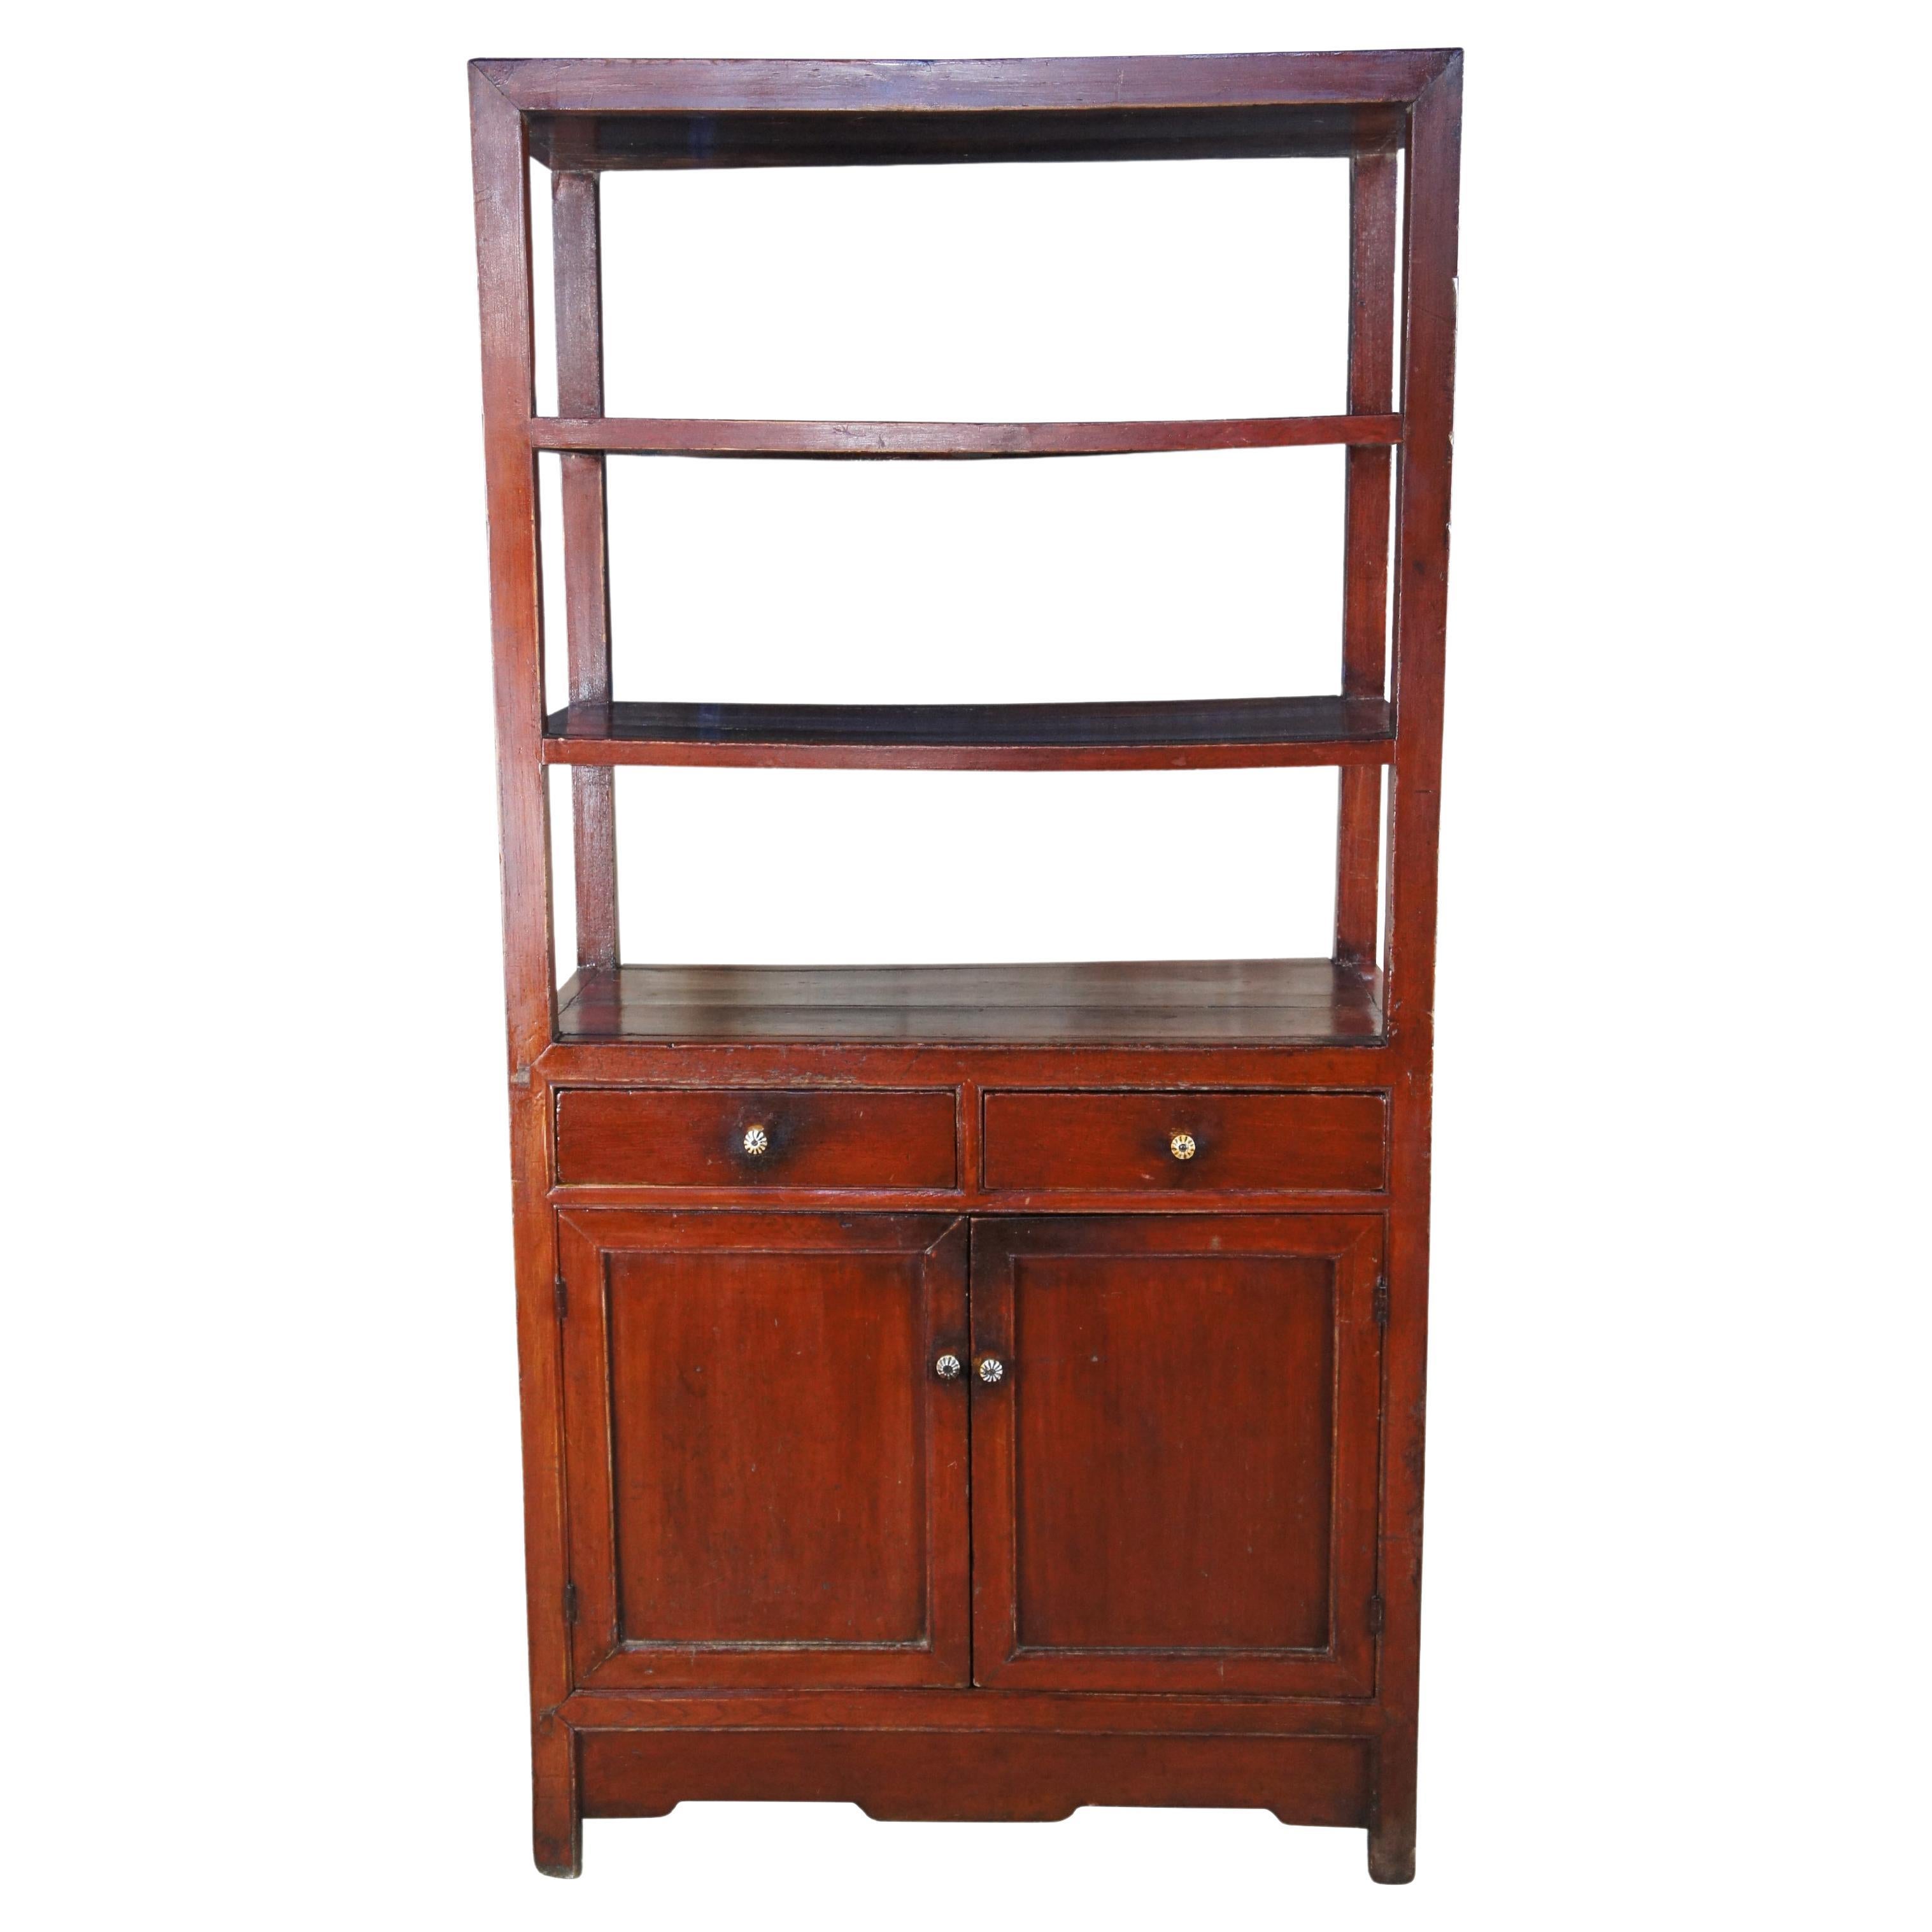 Early 20th century Chinese elm etagere cabinet. Features a modernist open form with three shelves over two dovetailed drawers and lower cupboard for storage. Constructed via mortise and tenon joinery. Great for use as a dry bar, room divider,